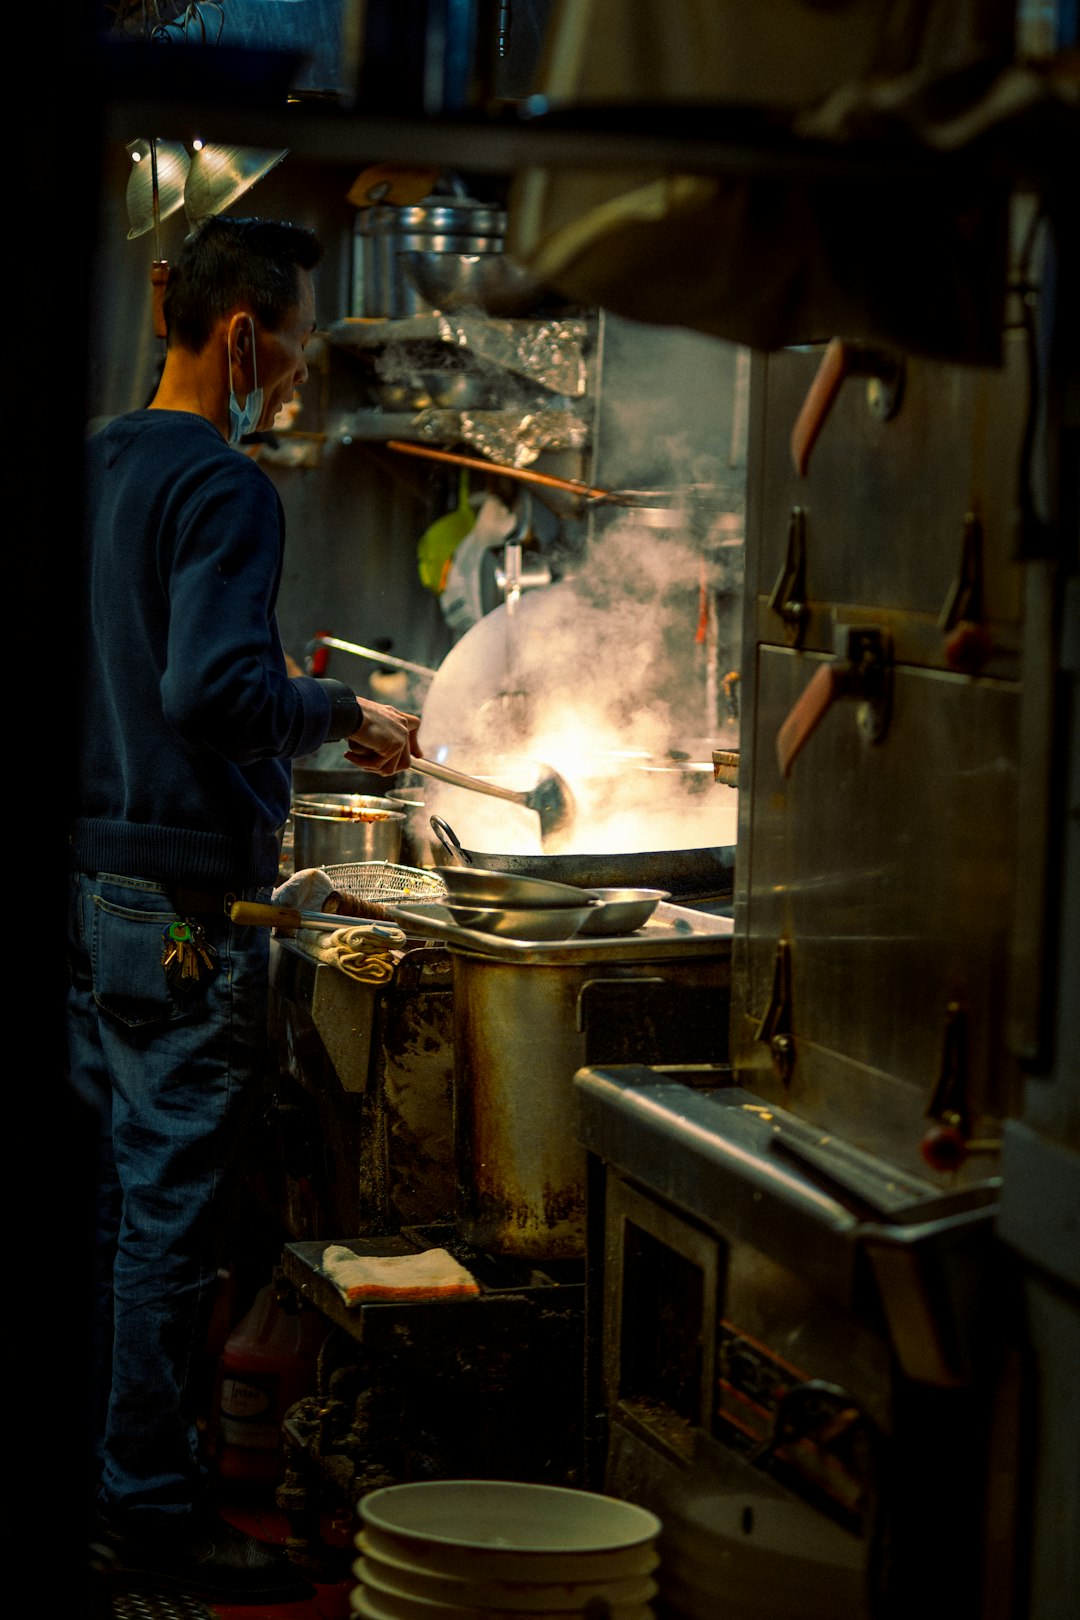 man in blue jacket cooking